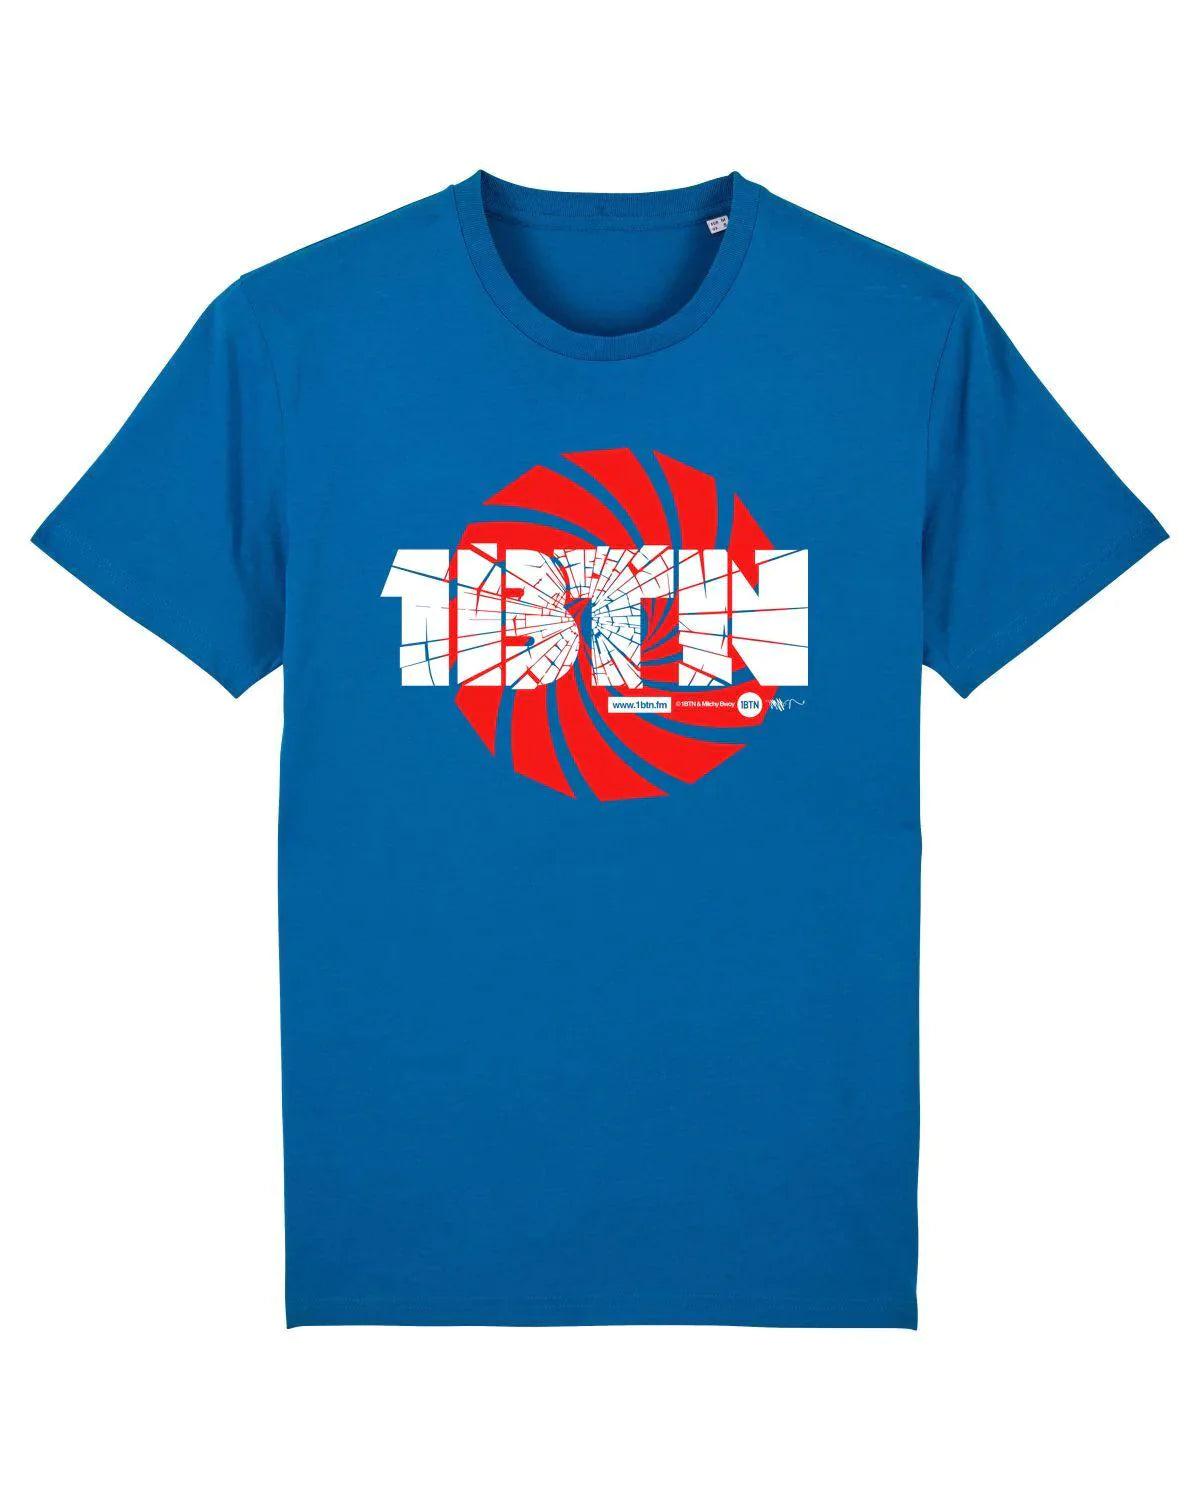 1BTN SWIRL By MItchy Bwoy: T-Shirt Official Merchandise of 1BTN.FM (5 Colour Options) - SOUND IS COLOUR